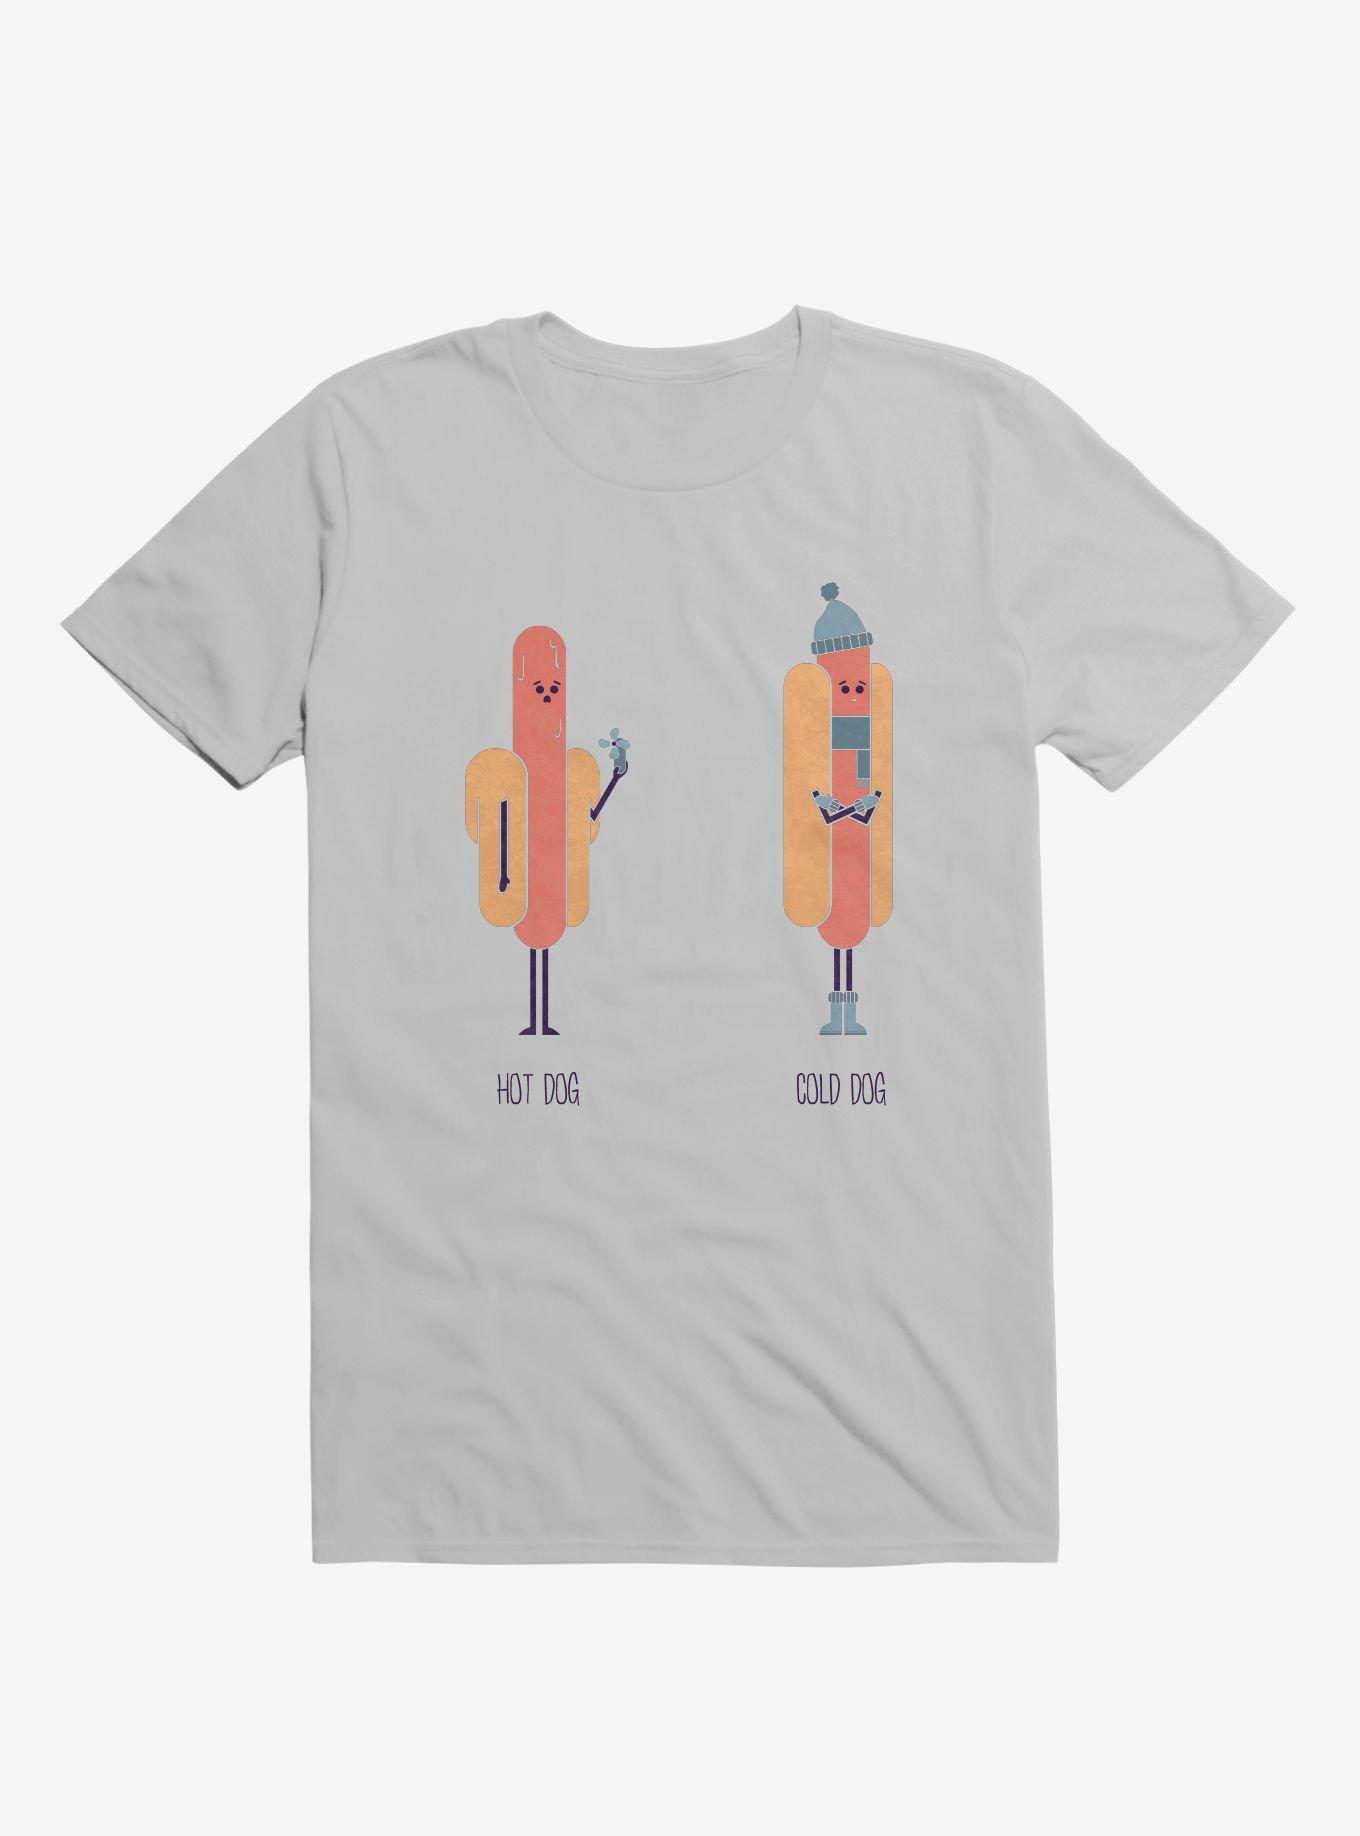 Opposites Hot Dog Cold Ice Grey T-Shirt